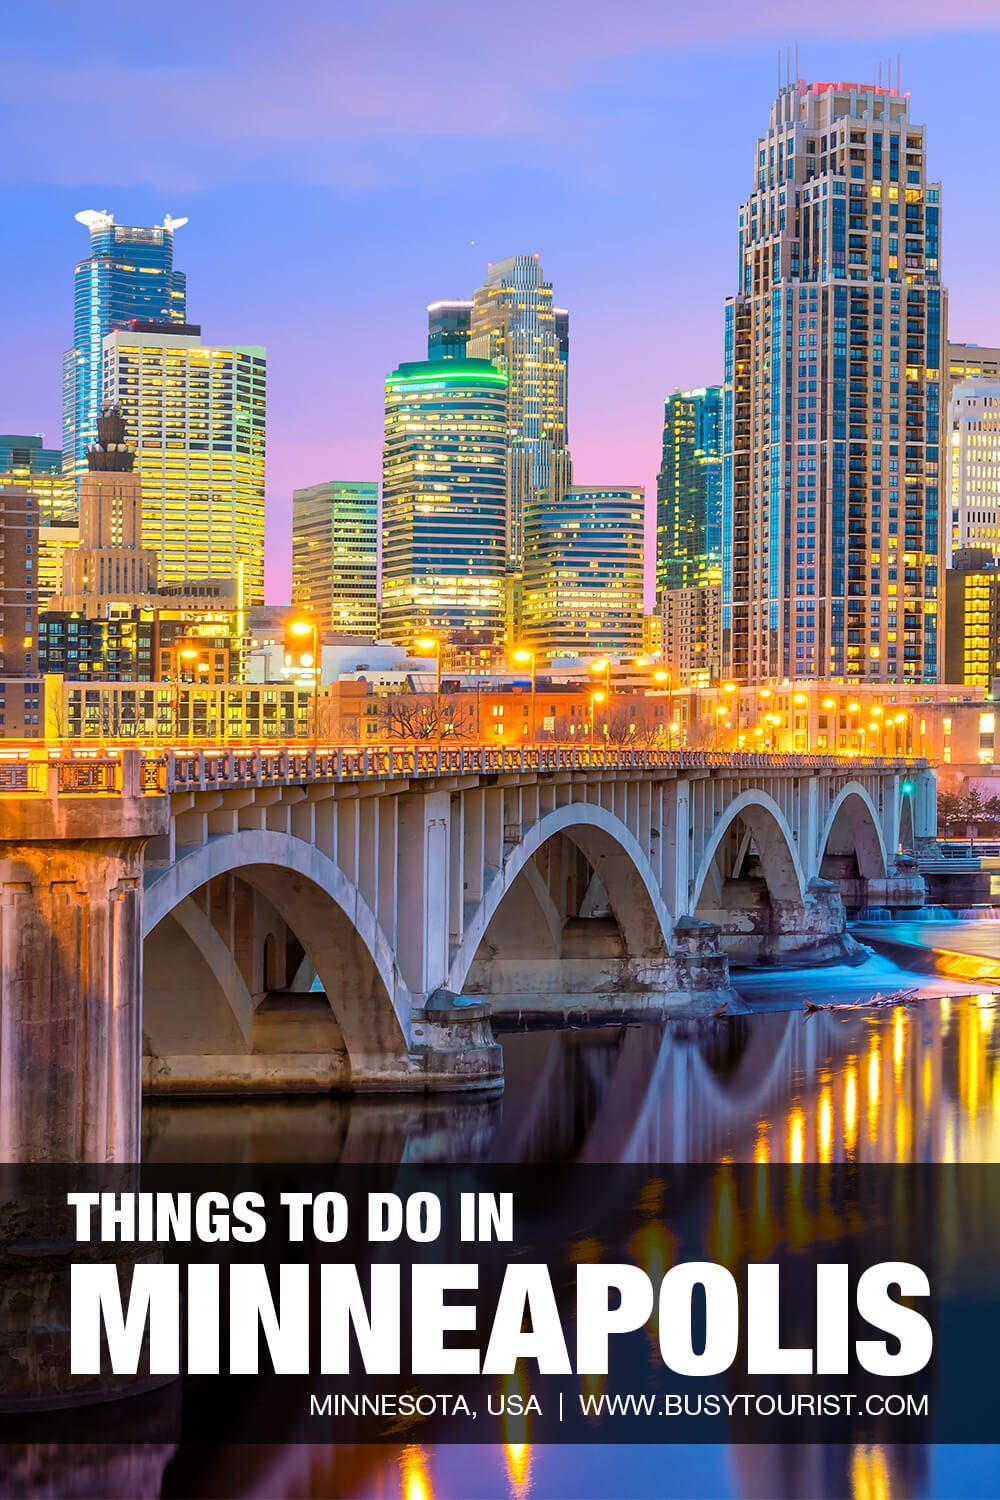 60 Best & Fun Things To Do In Minneapolis (MN) - Attractions & Activities